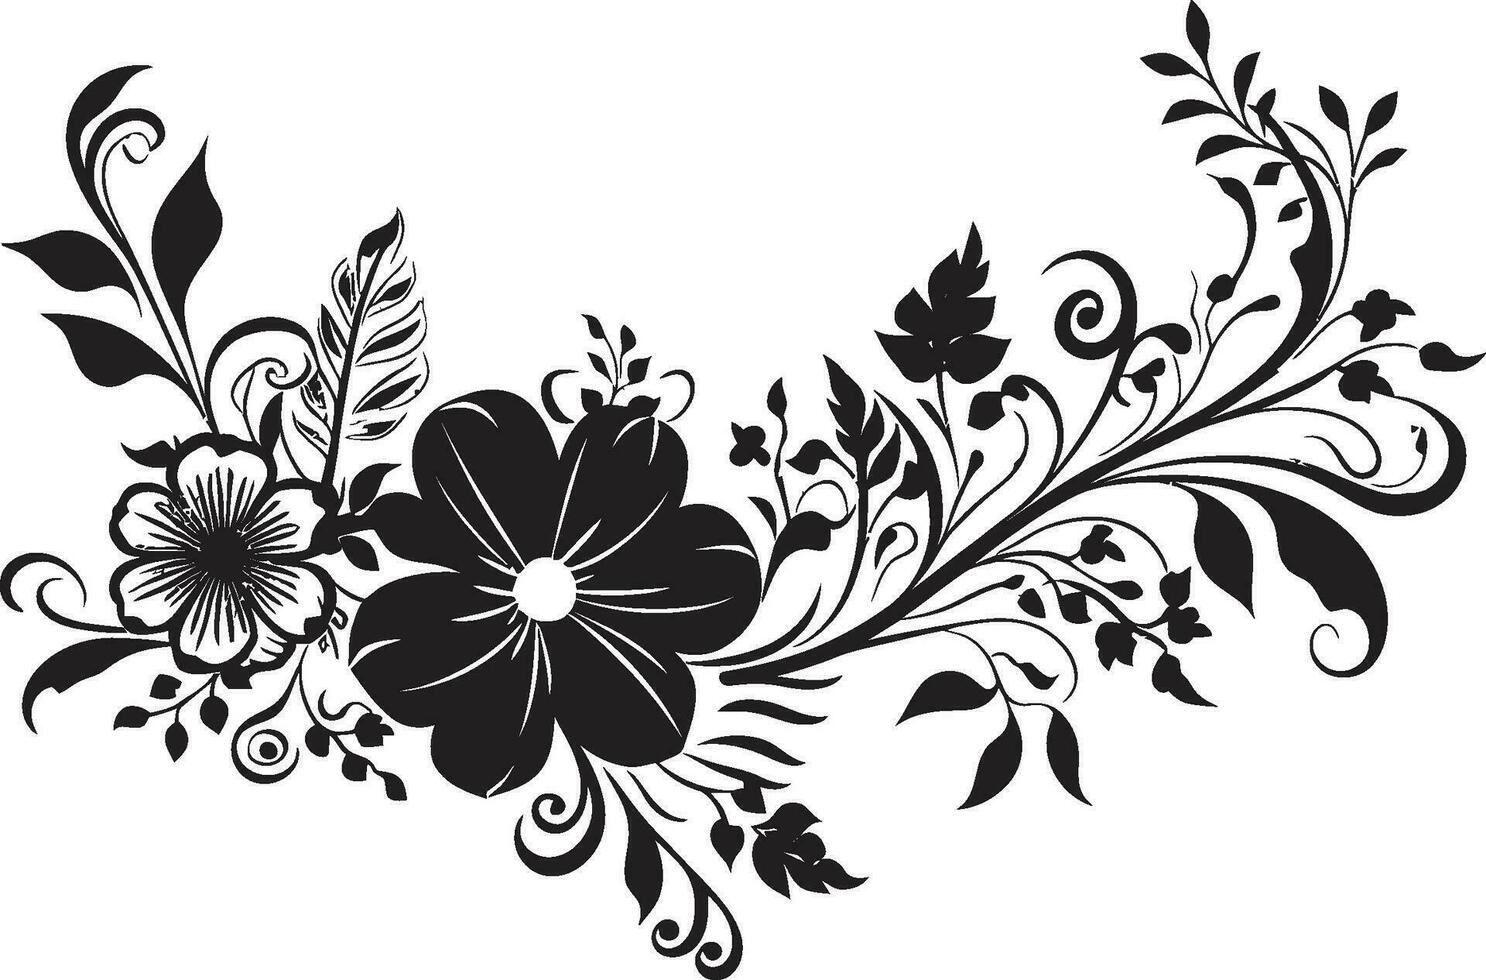 Whimsical Flora Handcrafted Vector Design Doodle Blossoms Black Floral Logo Icon